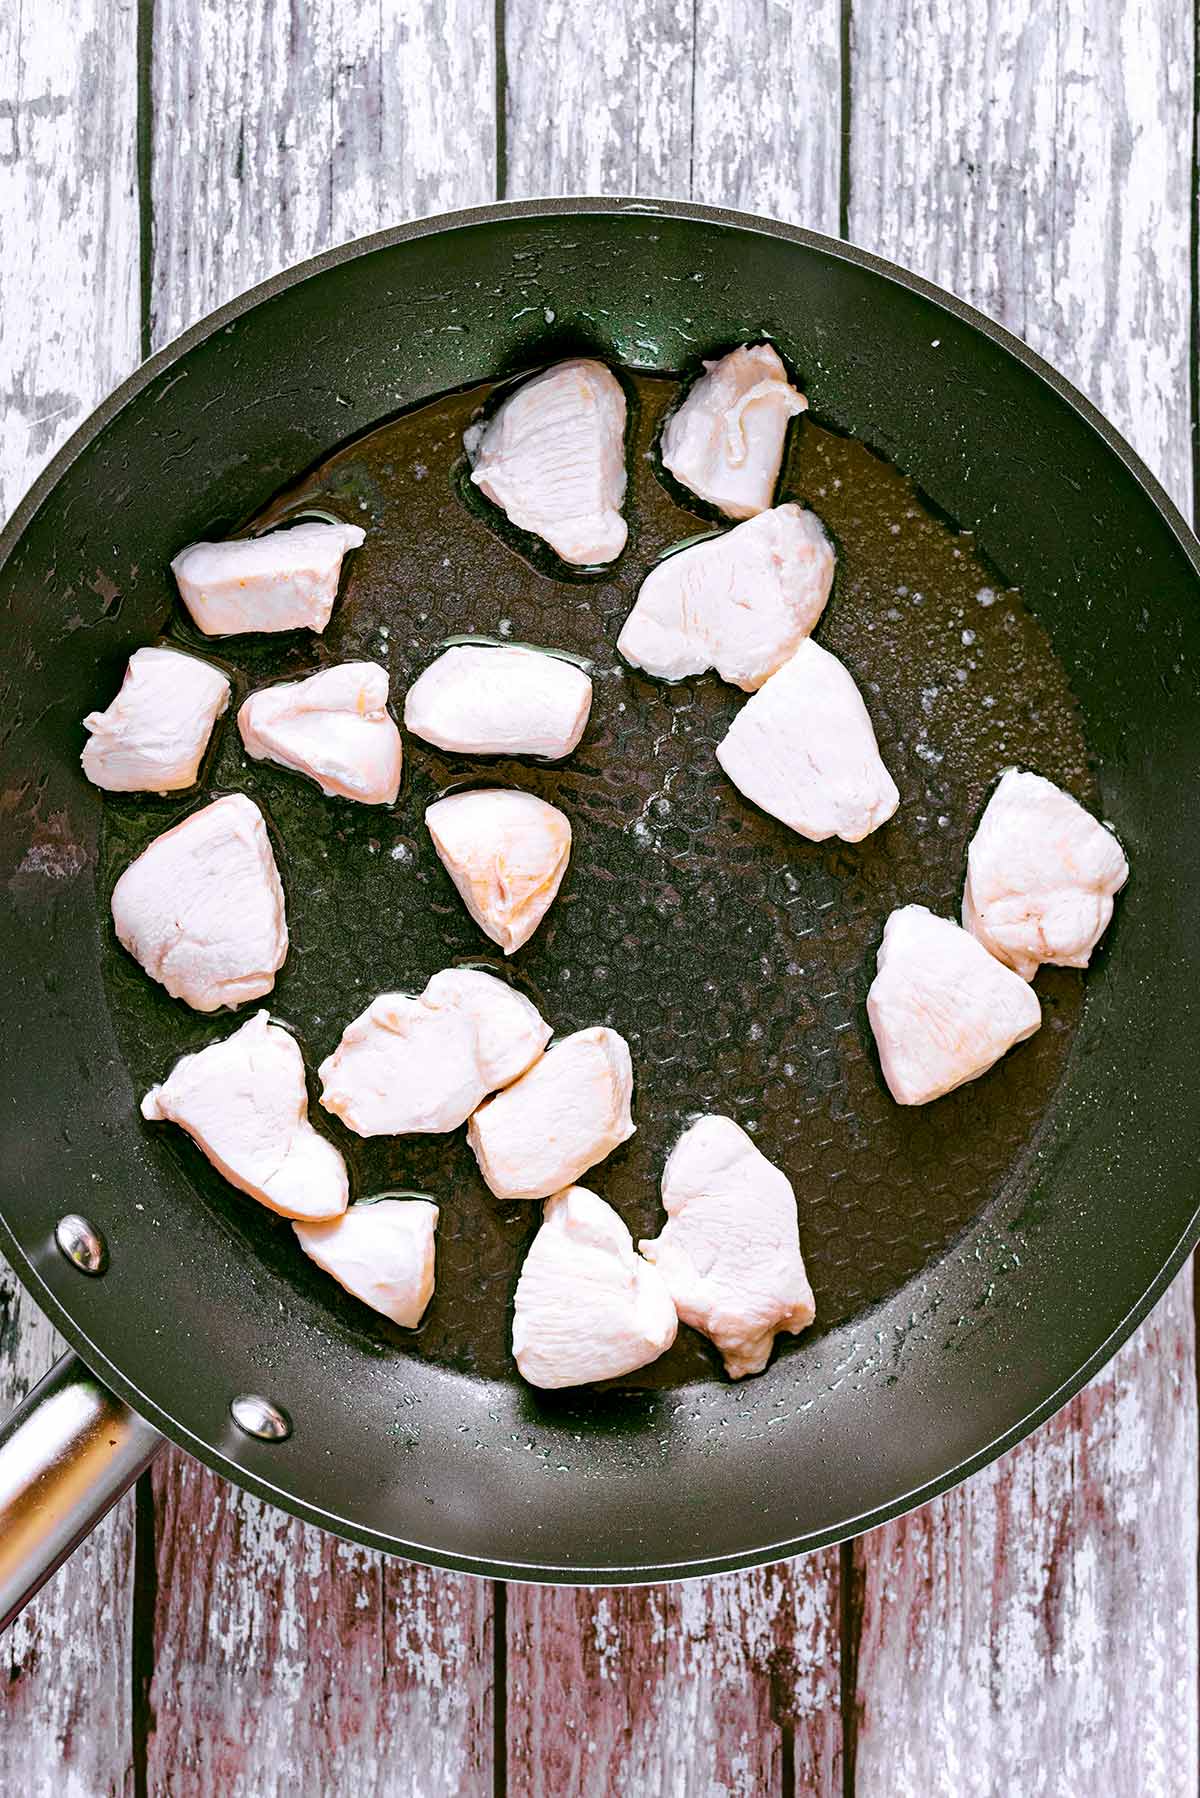 A frying pan with chunks of chicken cooking in it.